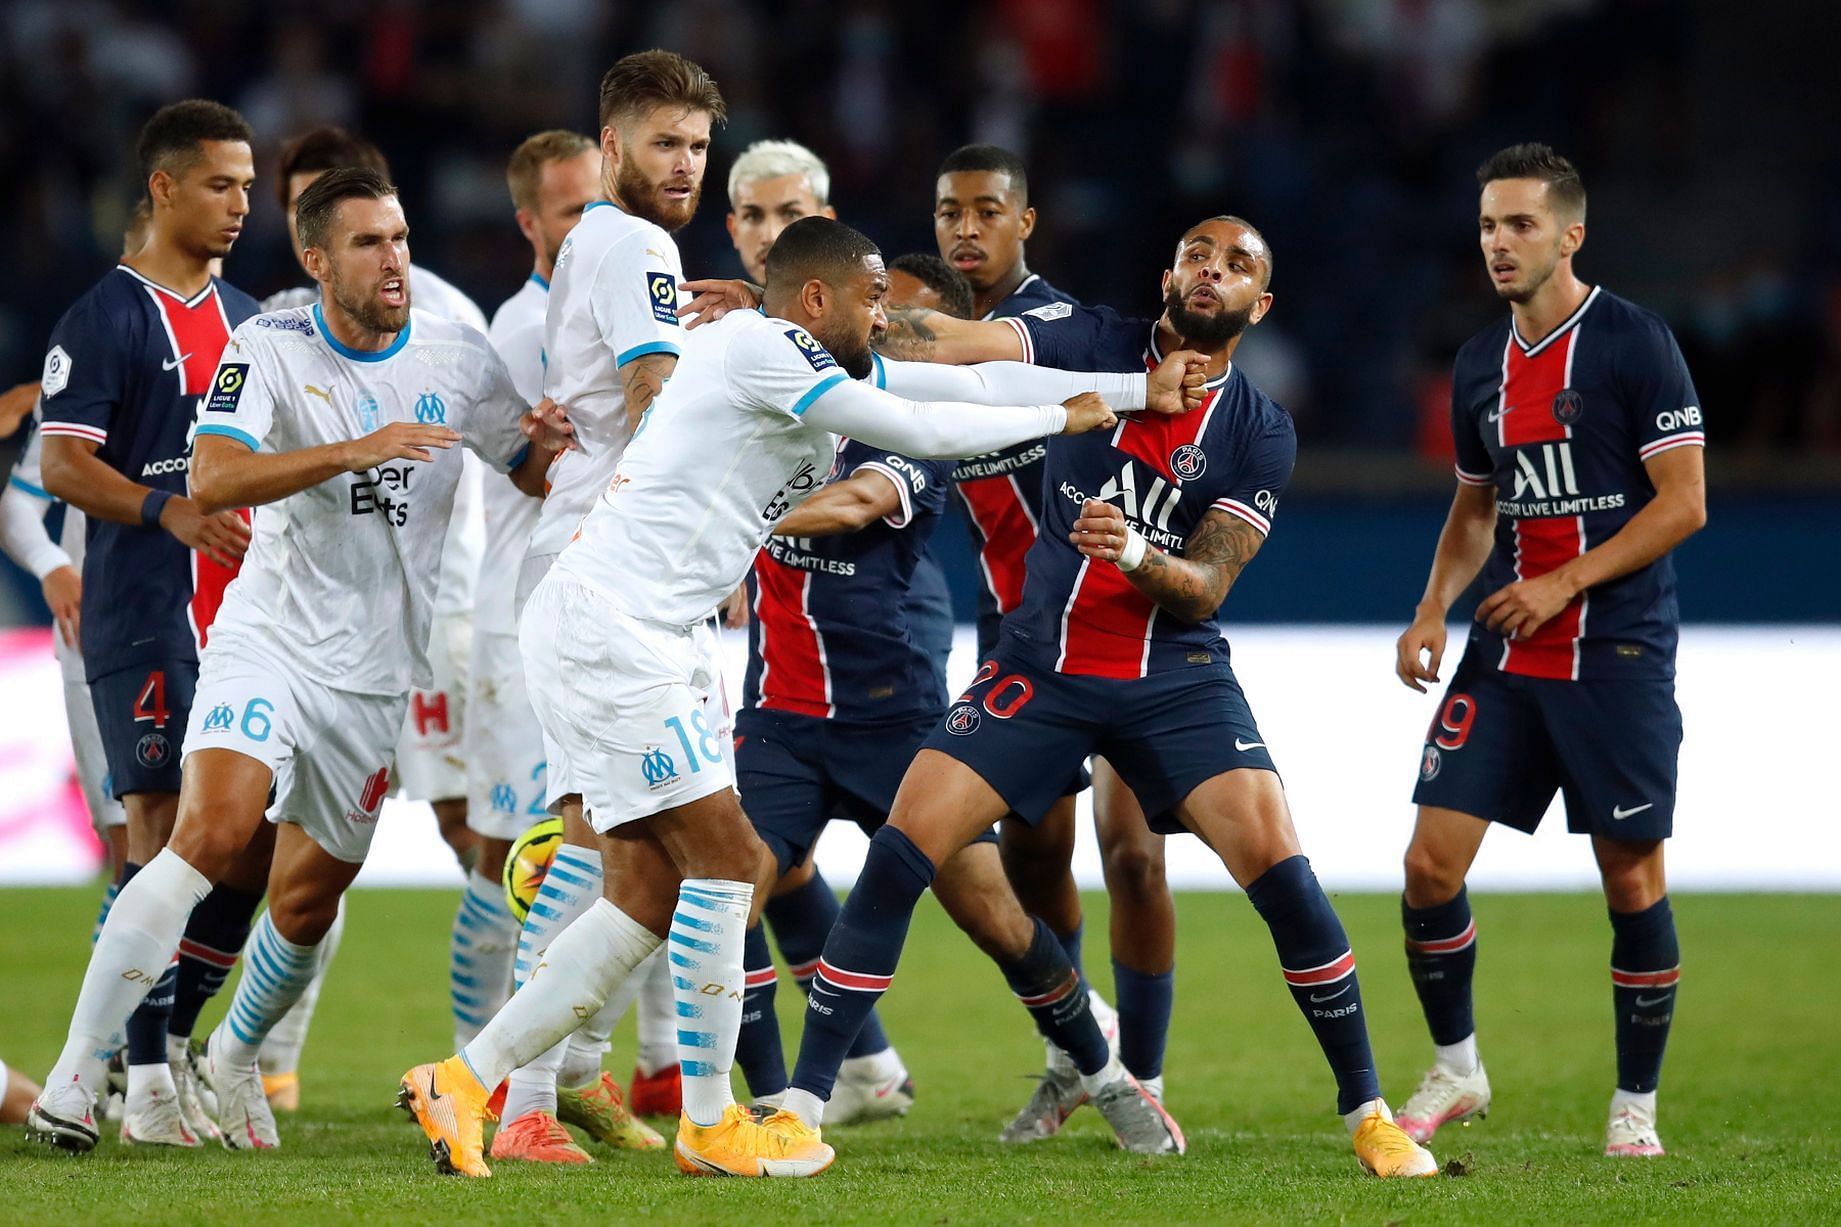 Le Classique has got really heated between PSG and Marseille of late.